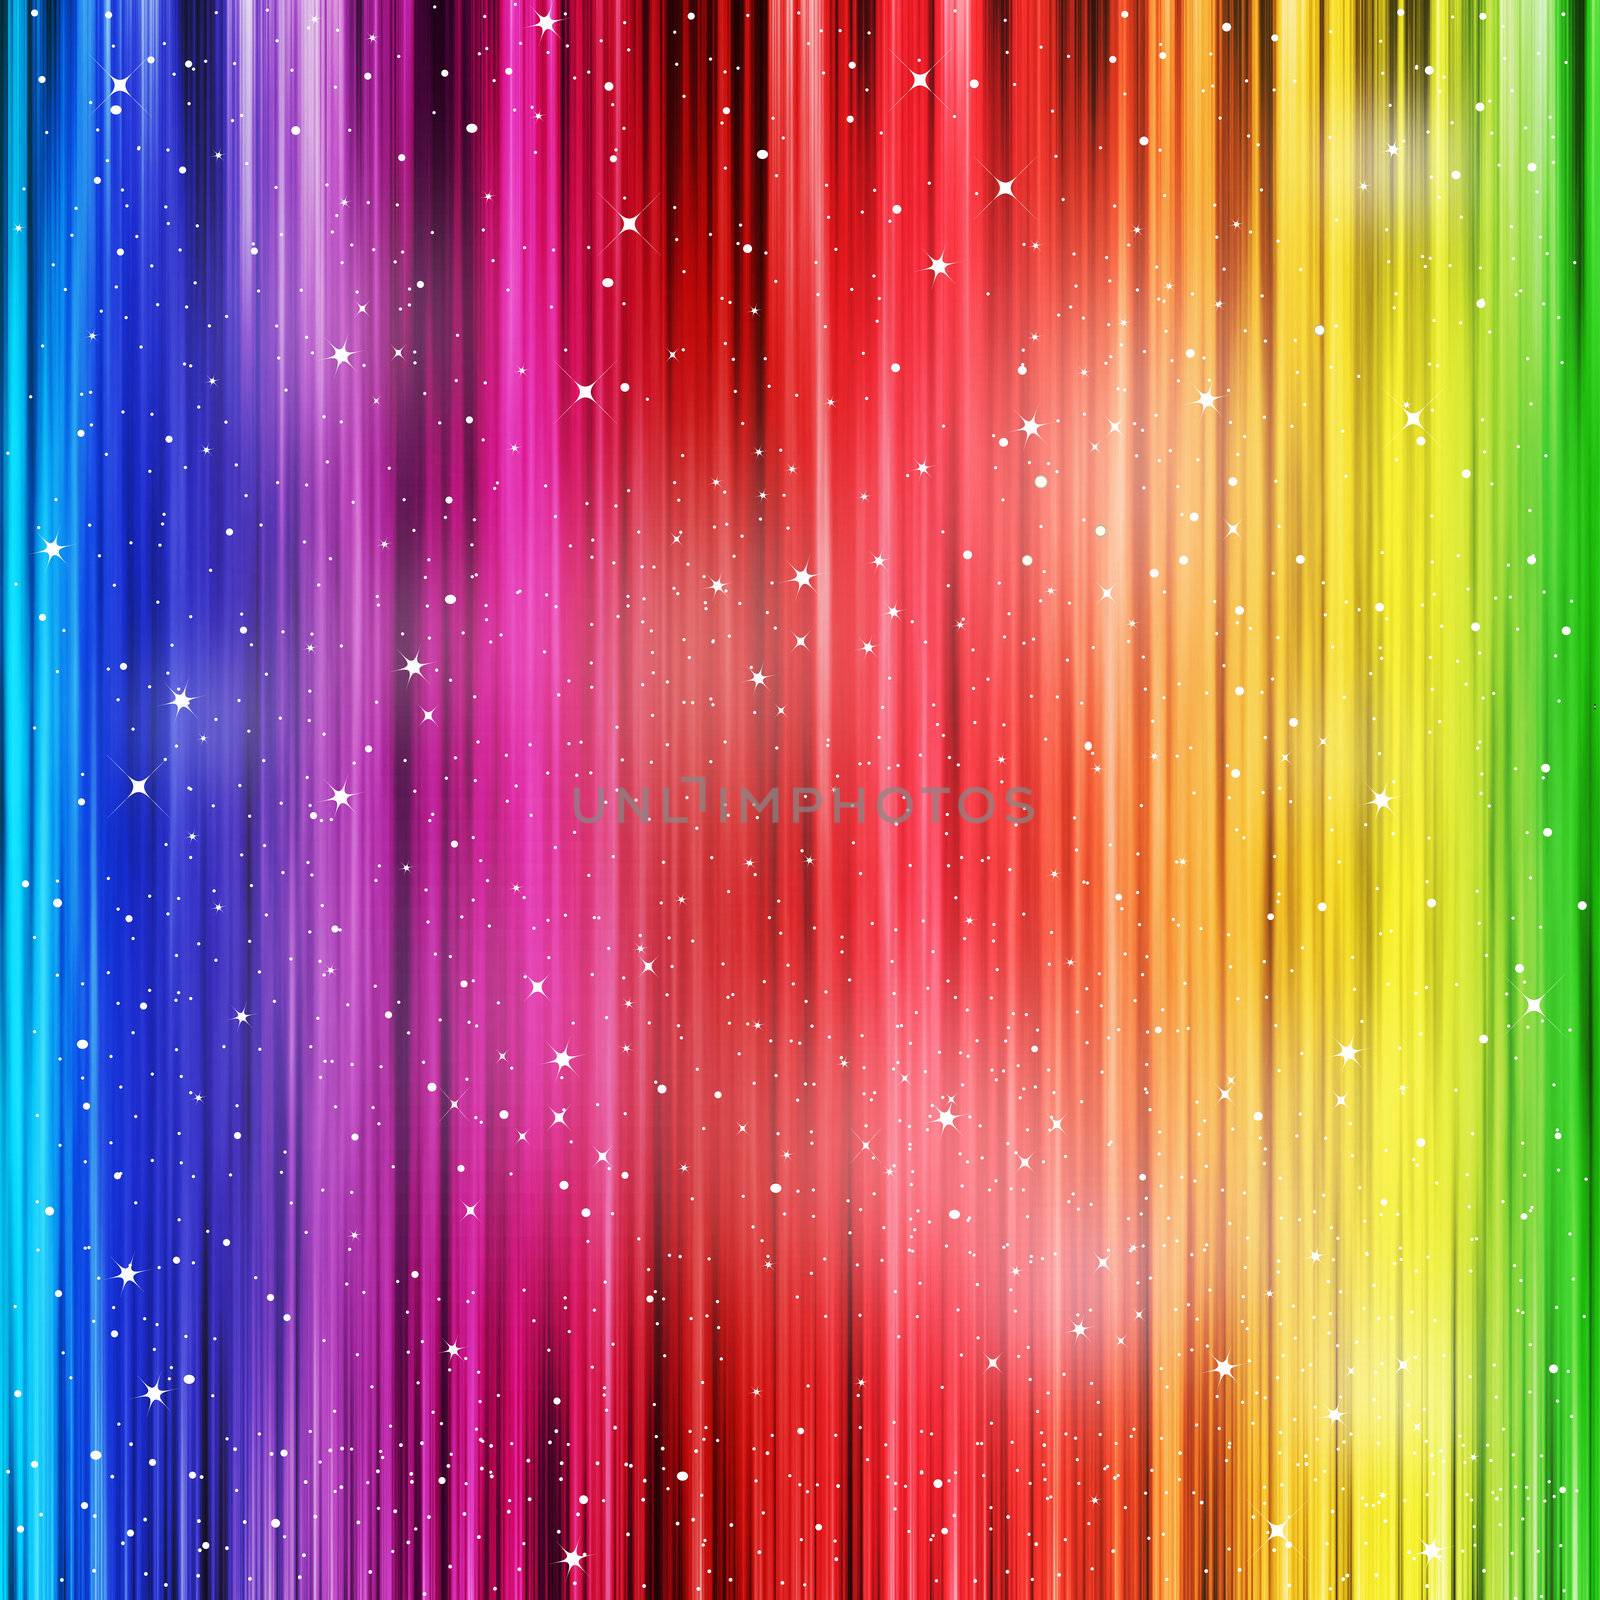 Colored striped background with stardust by hibrida13